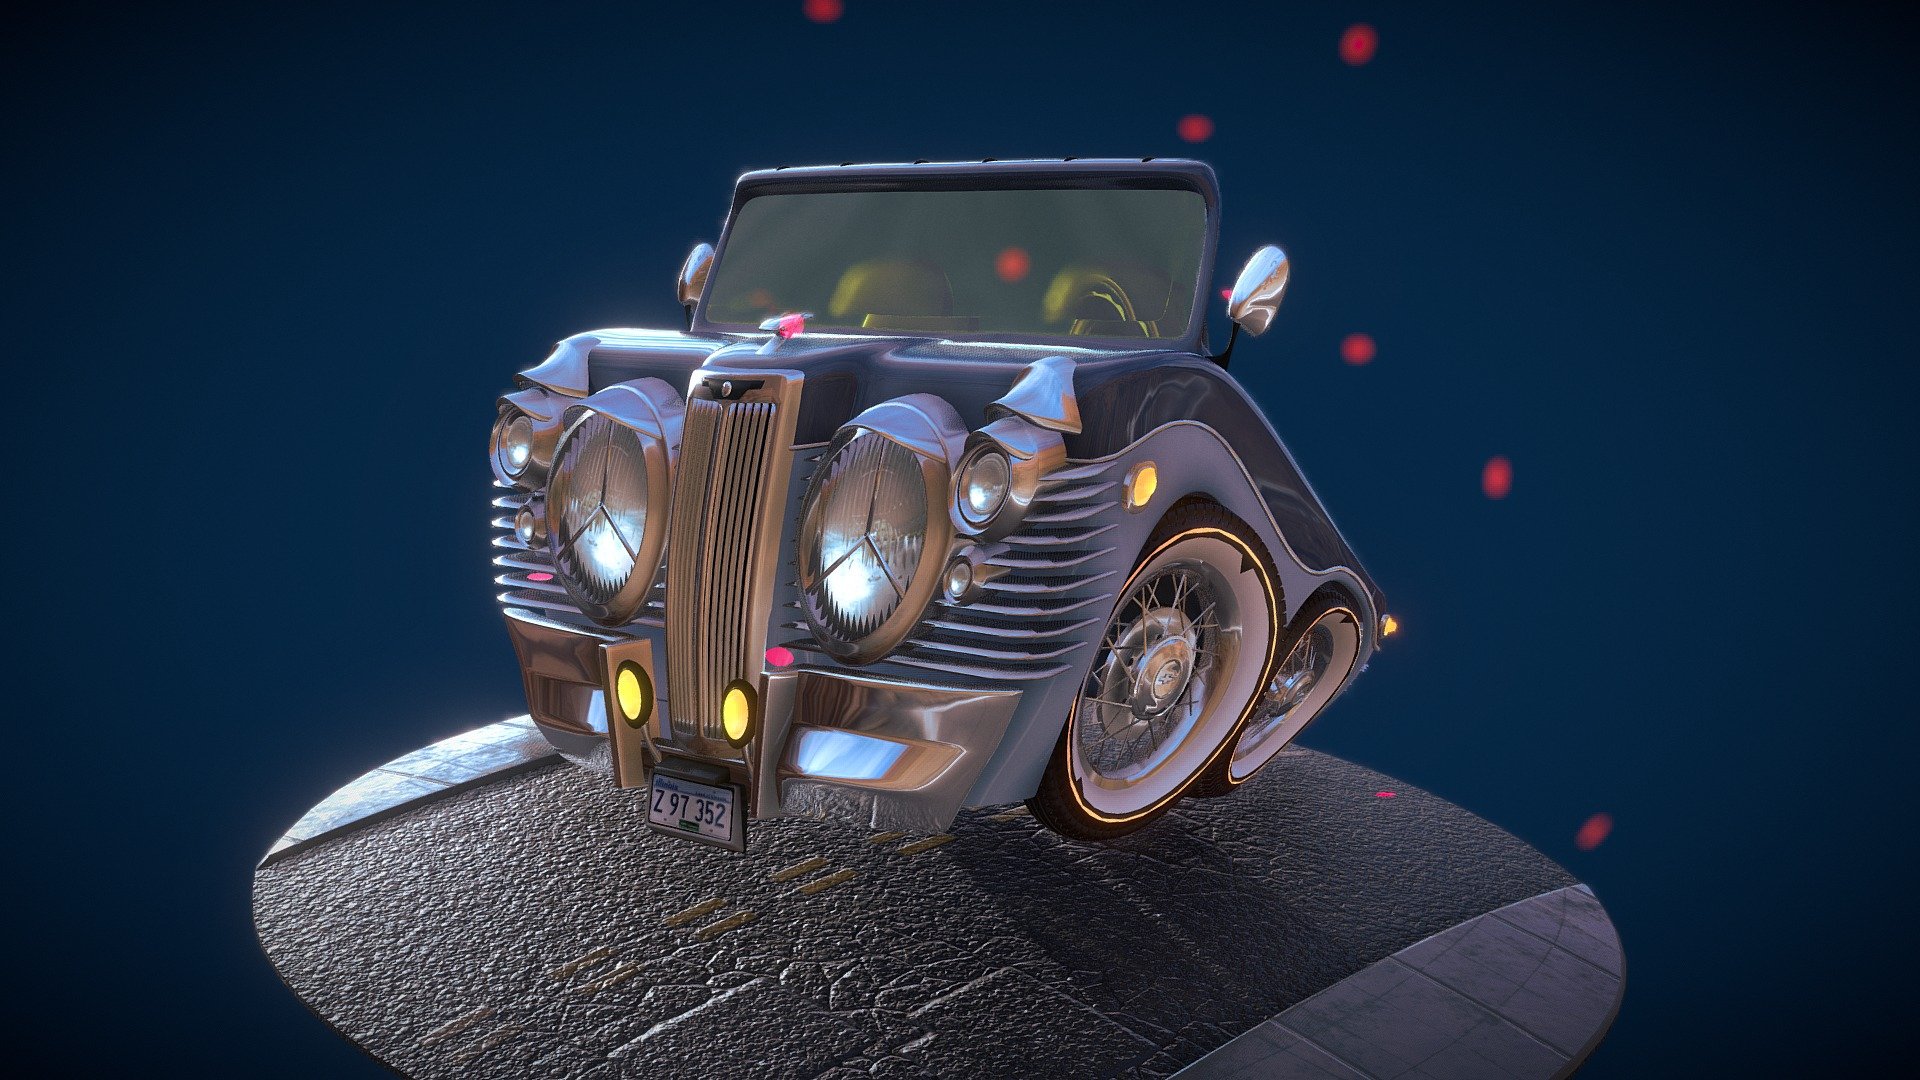 Stuts car has been my favourite car! I dont think i did justice to the car. The original STUTS looks like a Stuart Little with big head lamps.

Insta: https://www.instagram.com/dedrox__/
Check out my renders in artstation: https://www.artstation.com/artwork/wJ5od6 linktr.ee/DEDROX2K - cartoon vintage car stuts - Download Free 3D model by DEDROX (@Raghavprasanna) 3d model